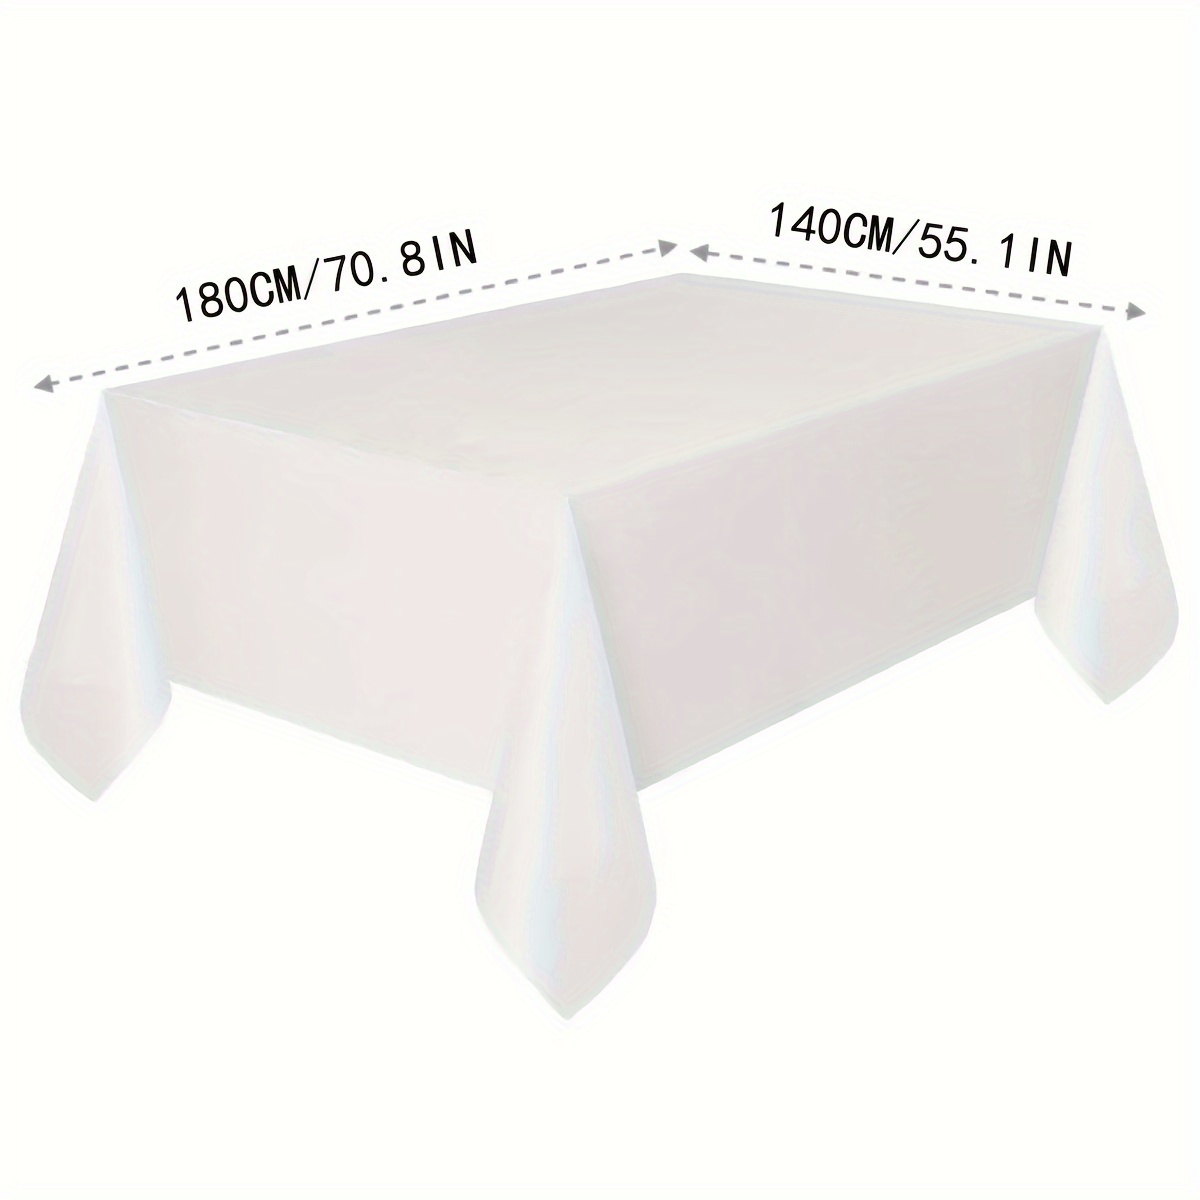 1pc, Satin Tablecloth, White Silky Outdoor Patio Table Cover, Luxury  Rectangular Happy Birthday Tablecloth For Party Wedding Dinner Restaurant  Decor